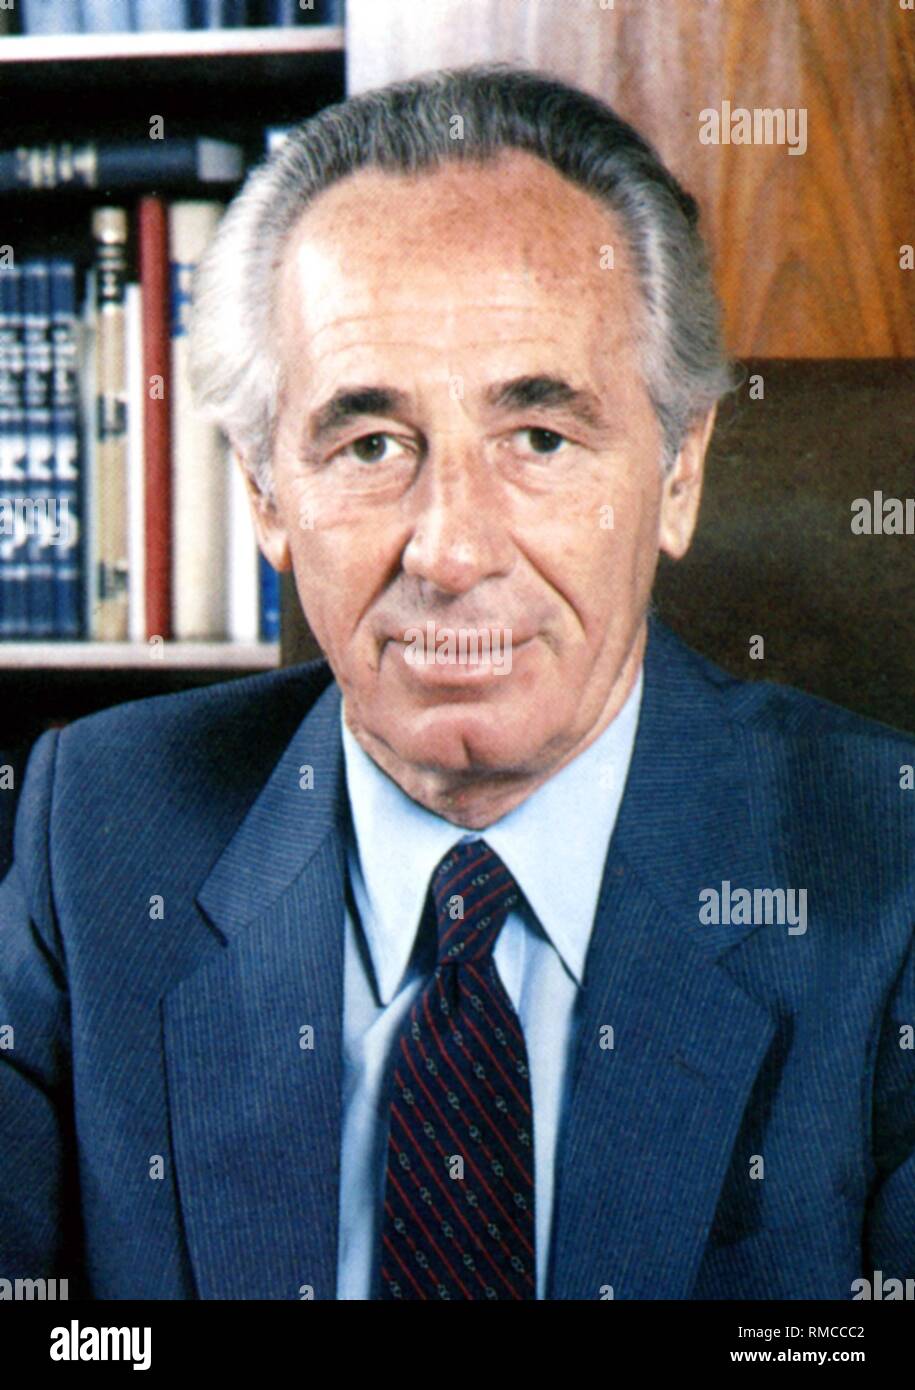 Shimon Peres - * 02.08.1923 - Portrait of the President of the State of Israel at his desk during his term as Prime Minister from 1984 to 1986, he served again as Prime Minister from 1995 to 1996. Undated photo from 1985. Stock Photo